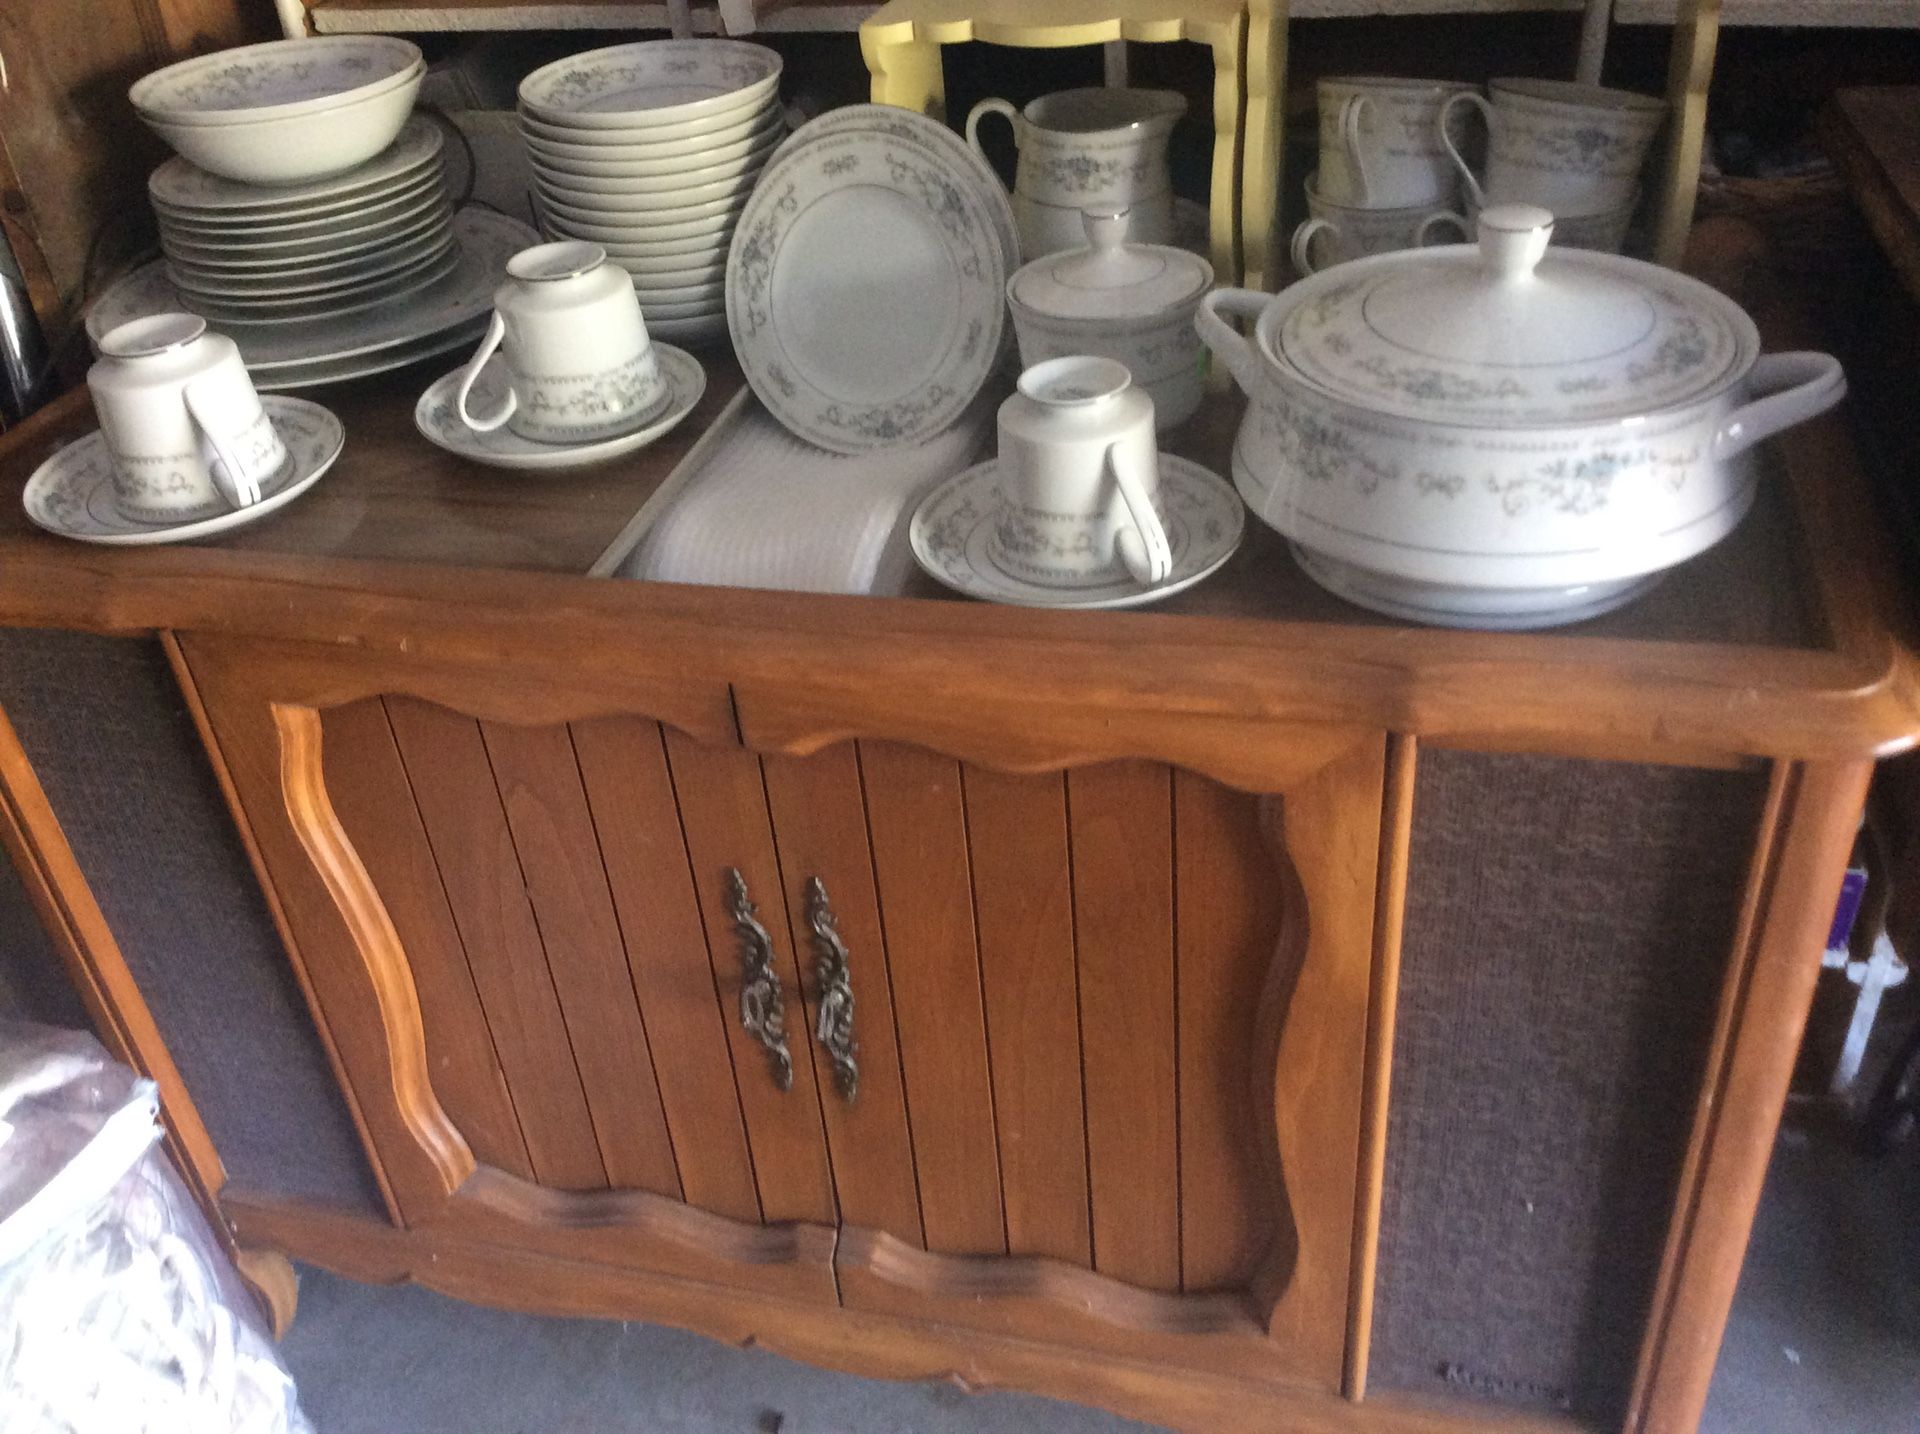 China Set For 12  And Serving Dishes.  $85. Plus